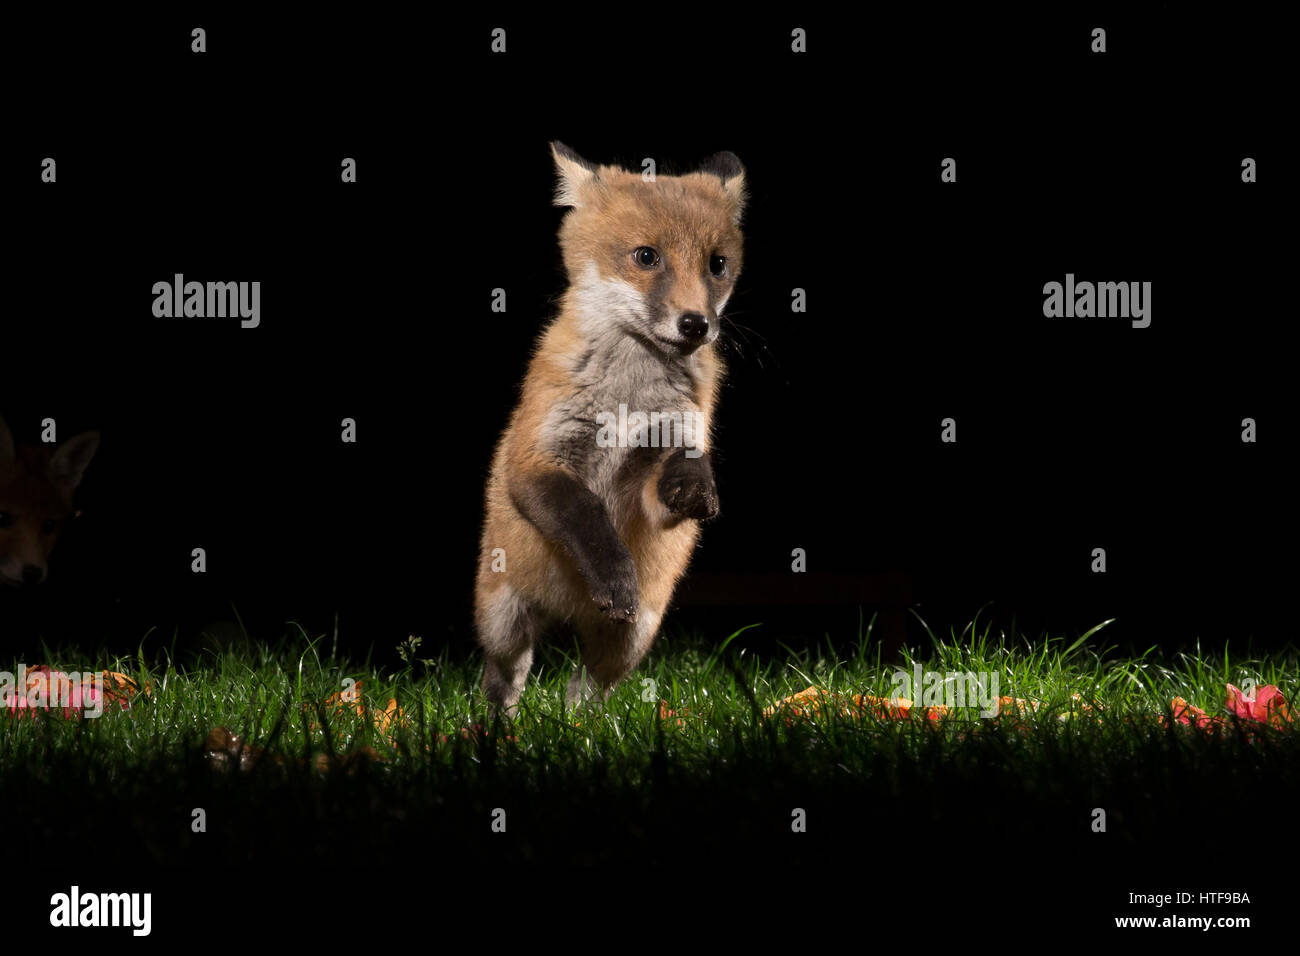 Fox cub playing in a London garden at night Stock Photo